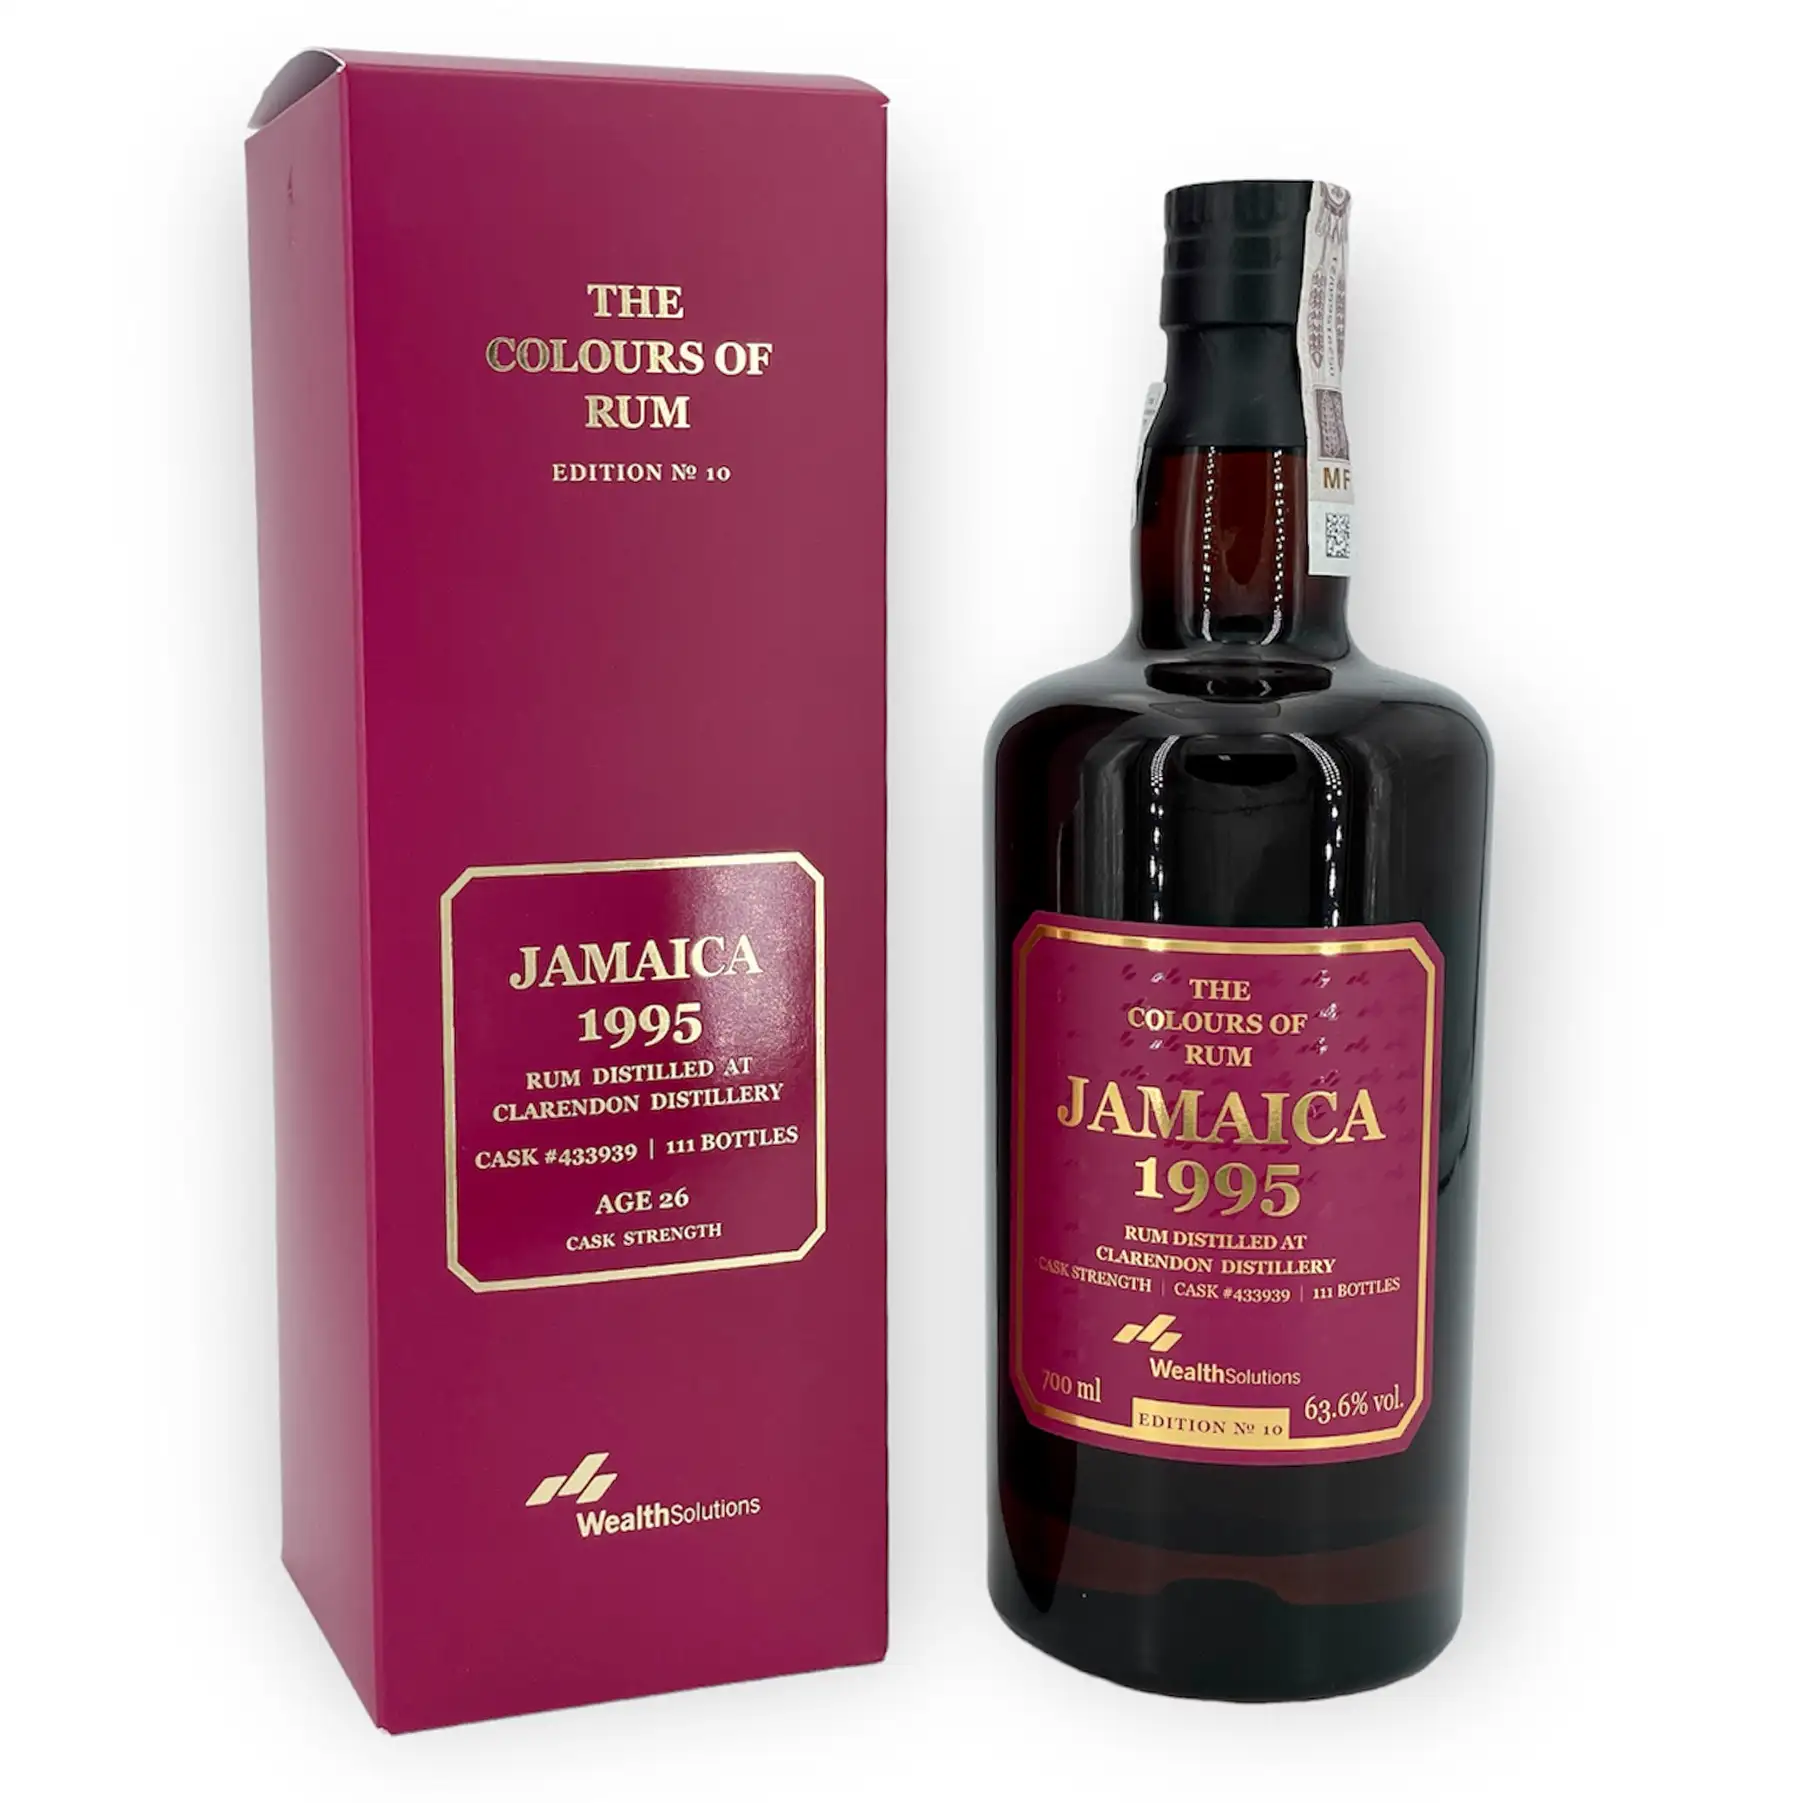 Image of the front of the bottle of the rum Jamaica No. 10